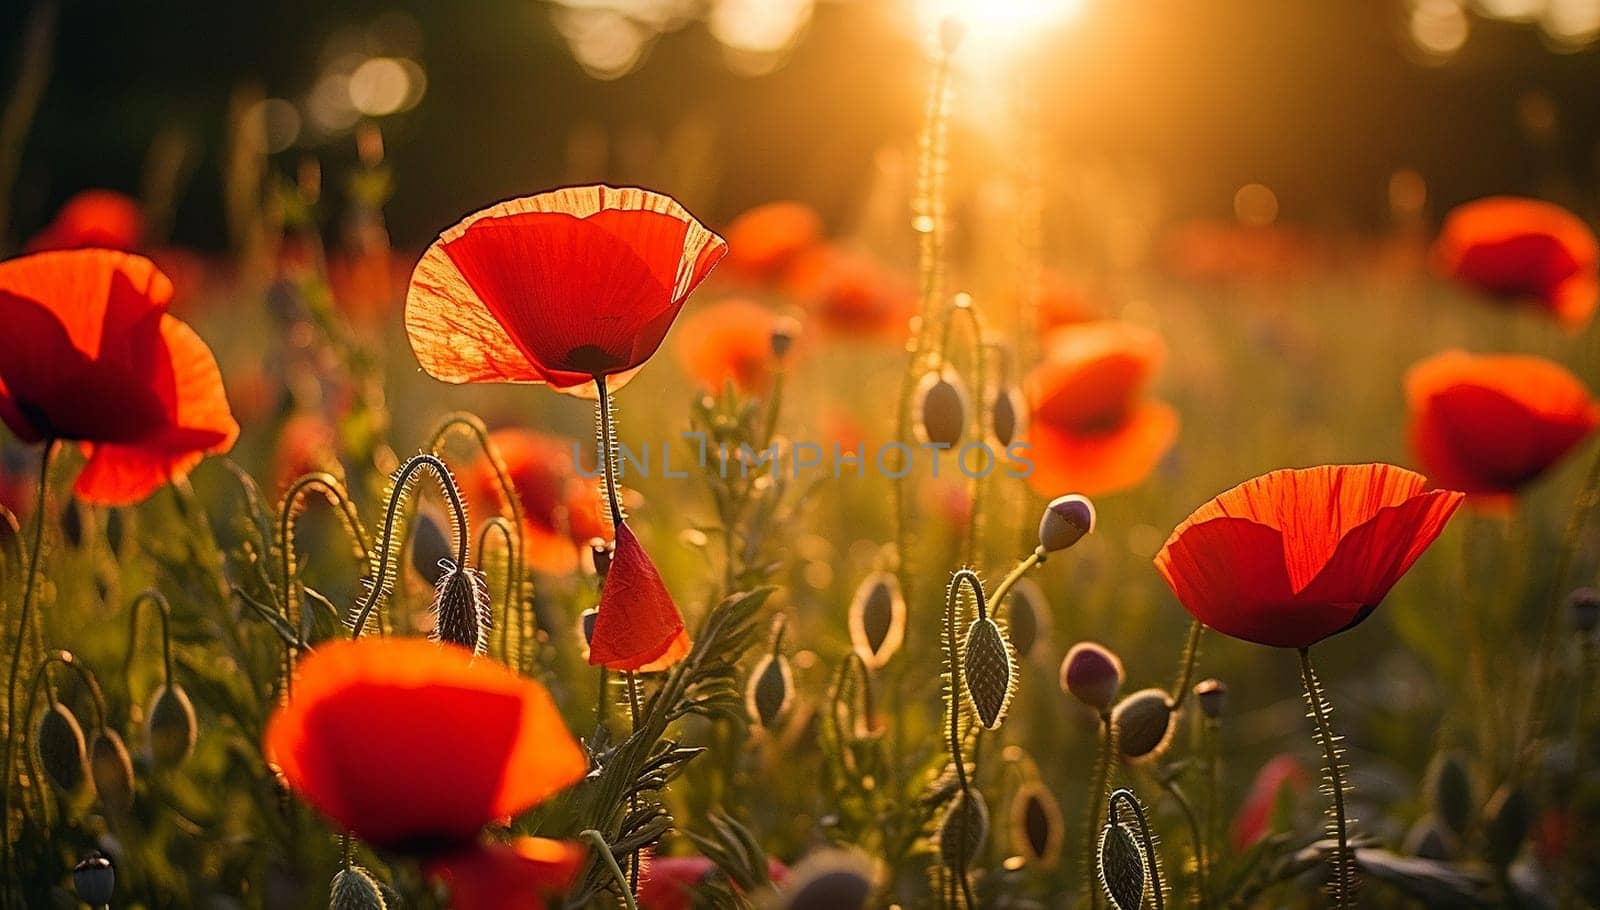 Bright poppy flowers against colorful sky. Field of wild poppies on a sunny spring day. Floral banner. Red poppy as a symbol of the memory of the victims of the war. morning sunlight. Magical landscape beauty